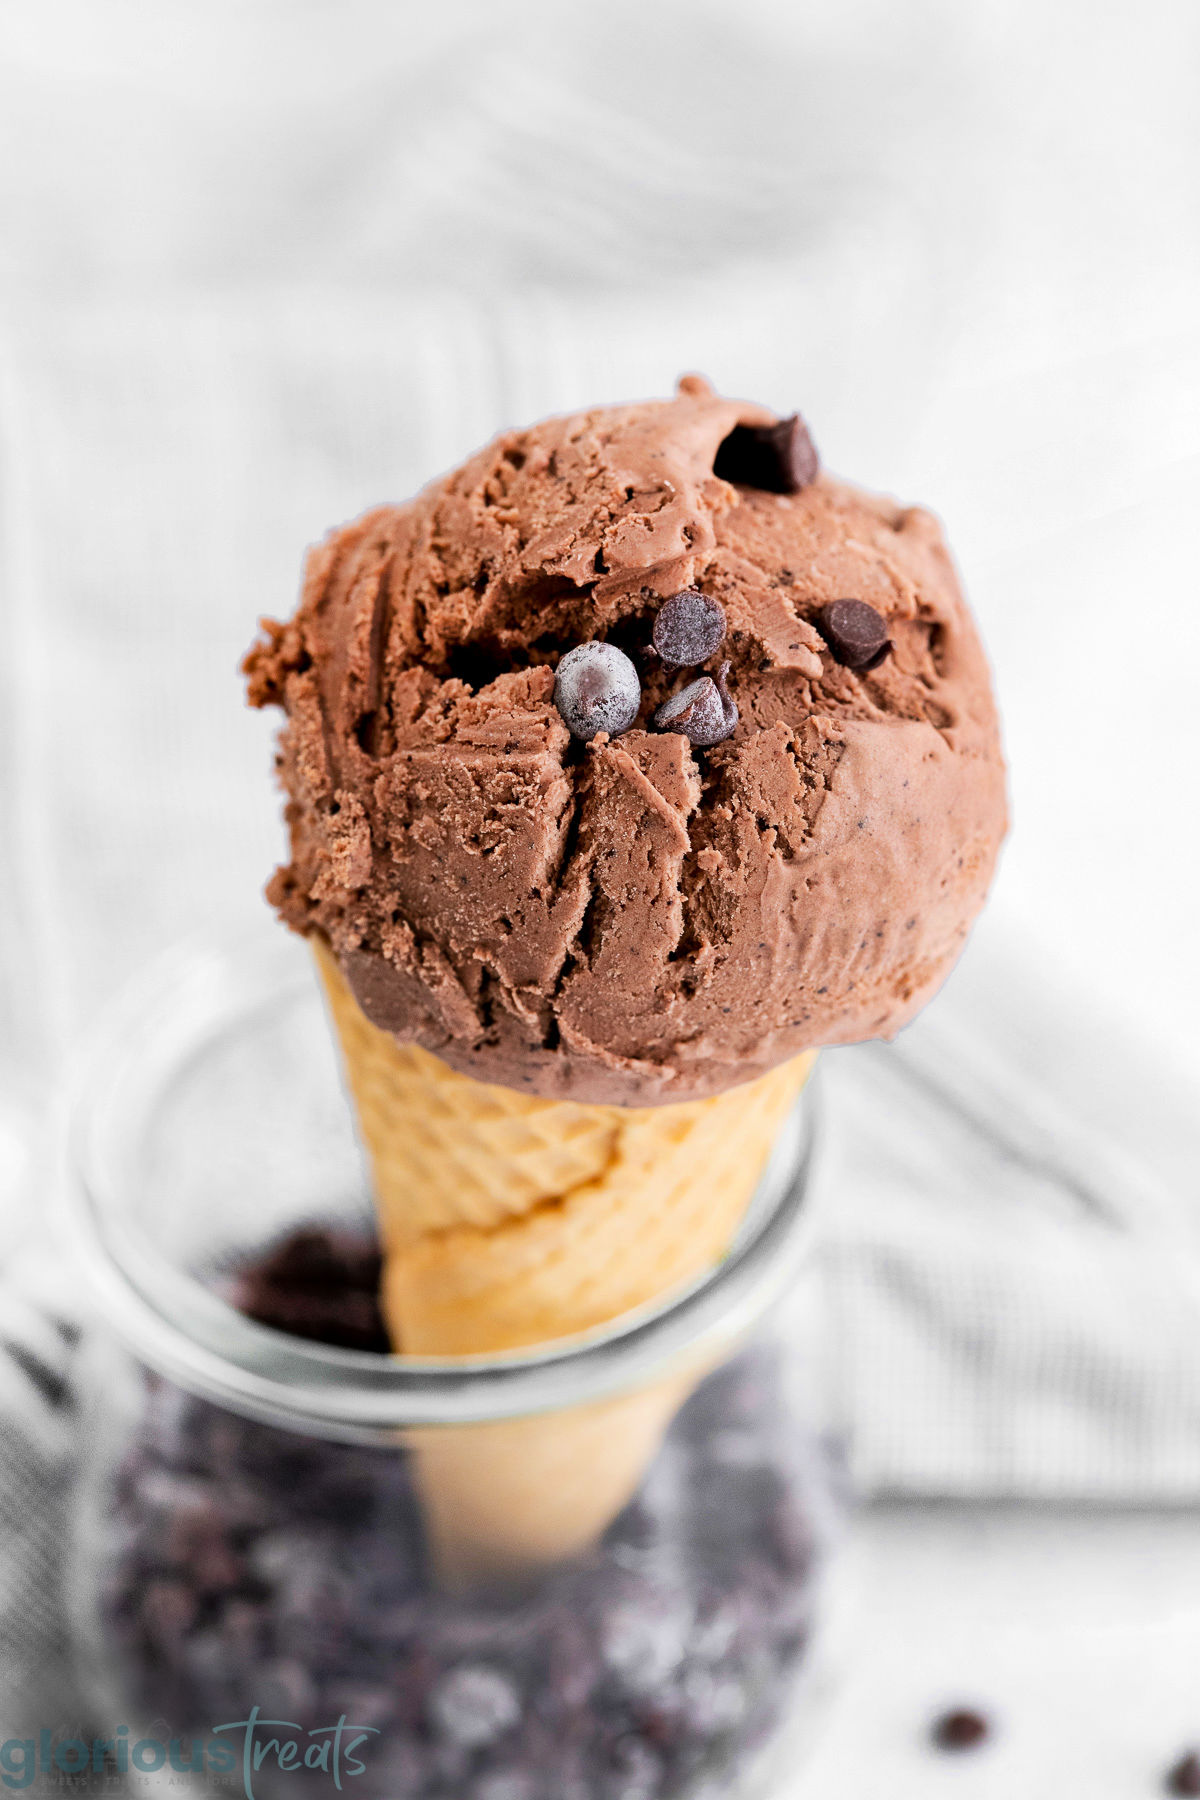 A scoop of no-churn chocolate ice cream on a cone sitting in a glass jar full of chocolate chips.